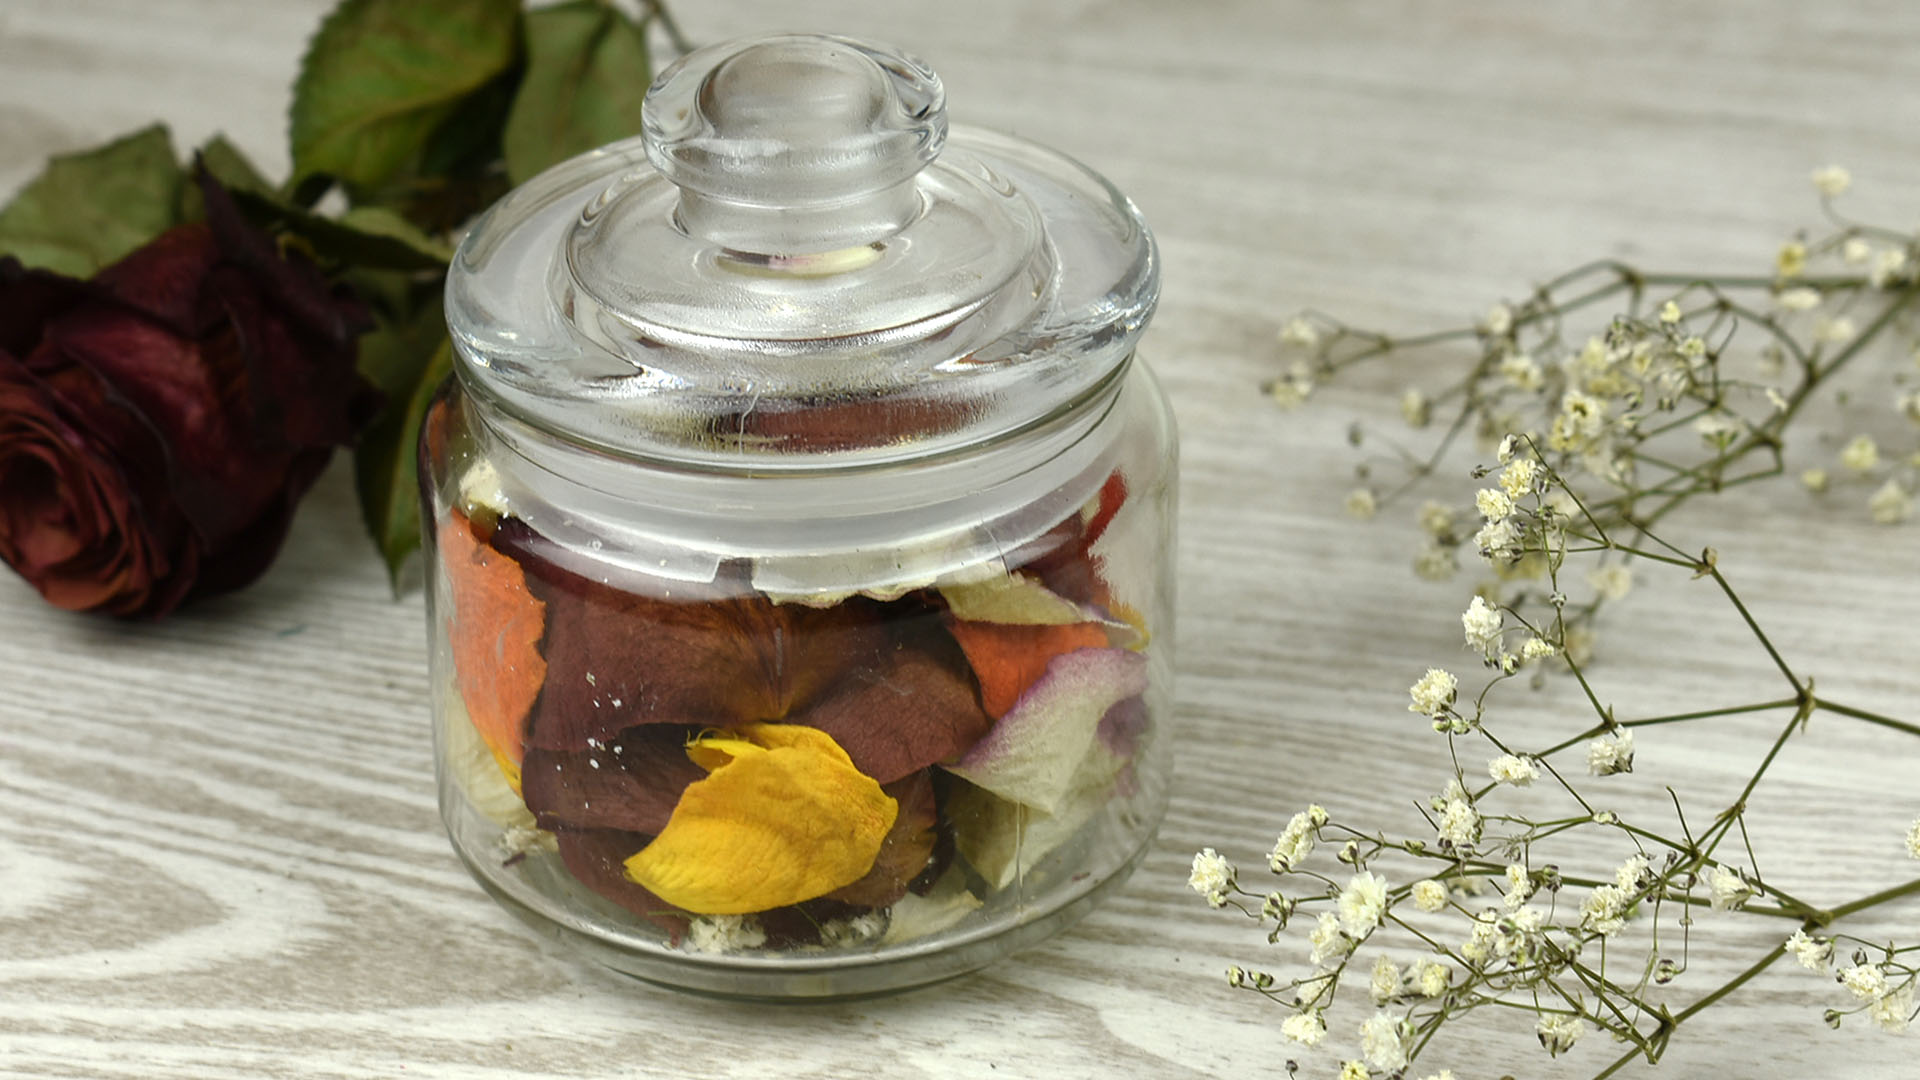 How To Store Dried Flower Petals